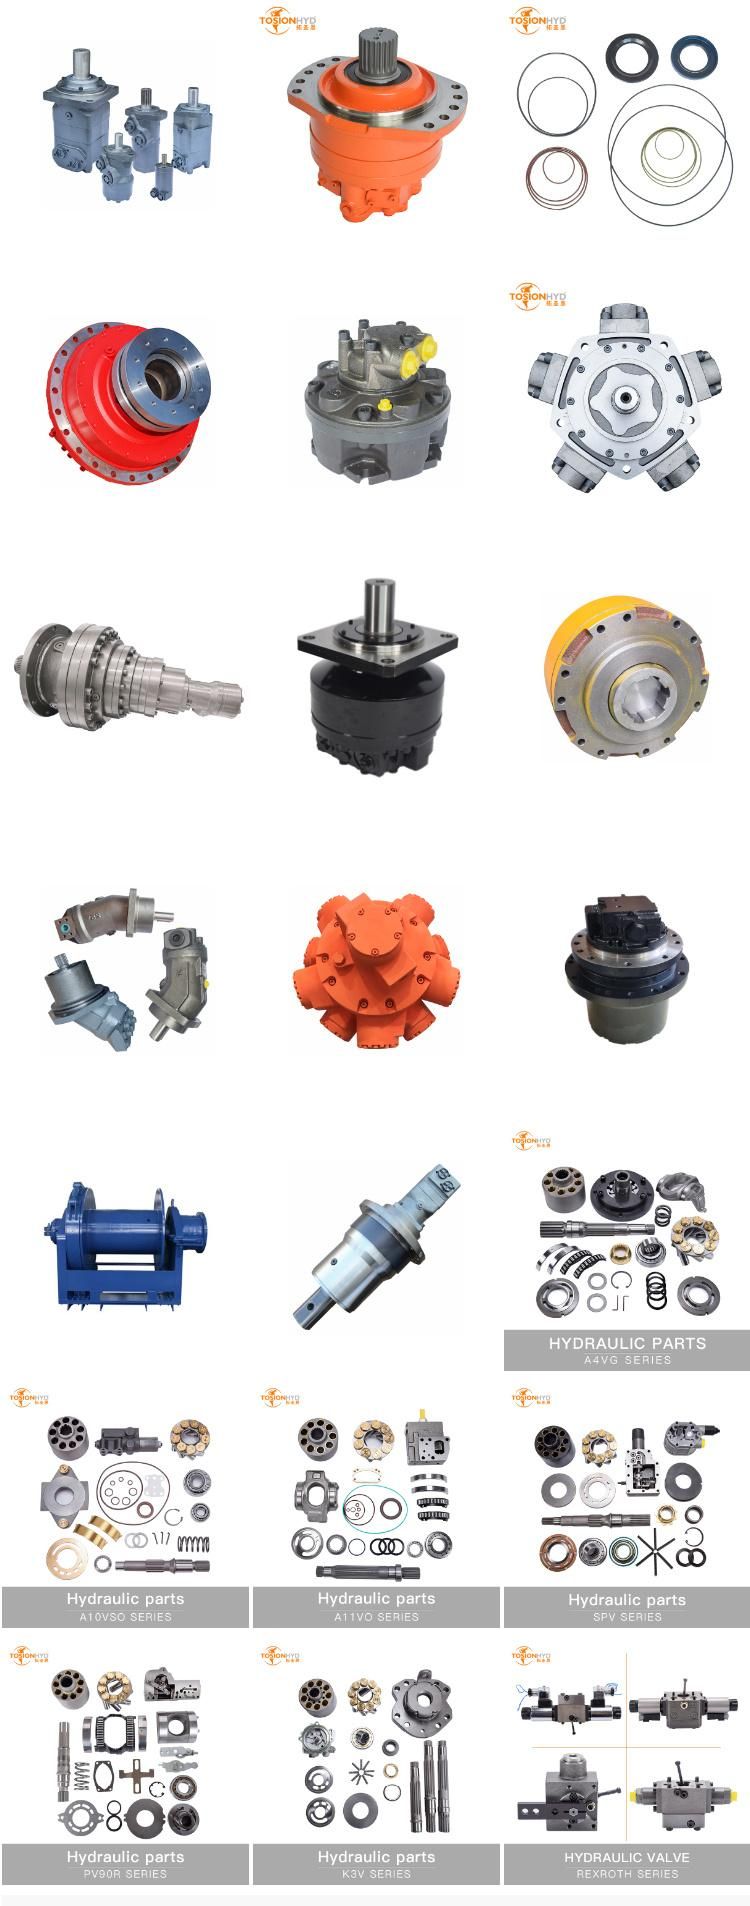 Hpv 091/091ds/091ew/091dw Hpv091 Hpv091ds Hpv091ew Hpv091dw Excavator Hydraulic Pump Parts with Hitachi Repair Kit Spare